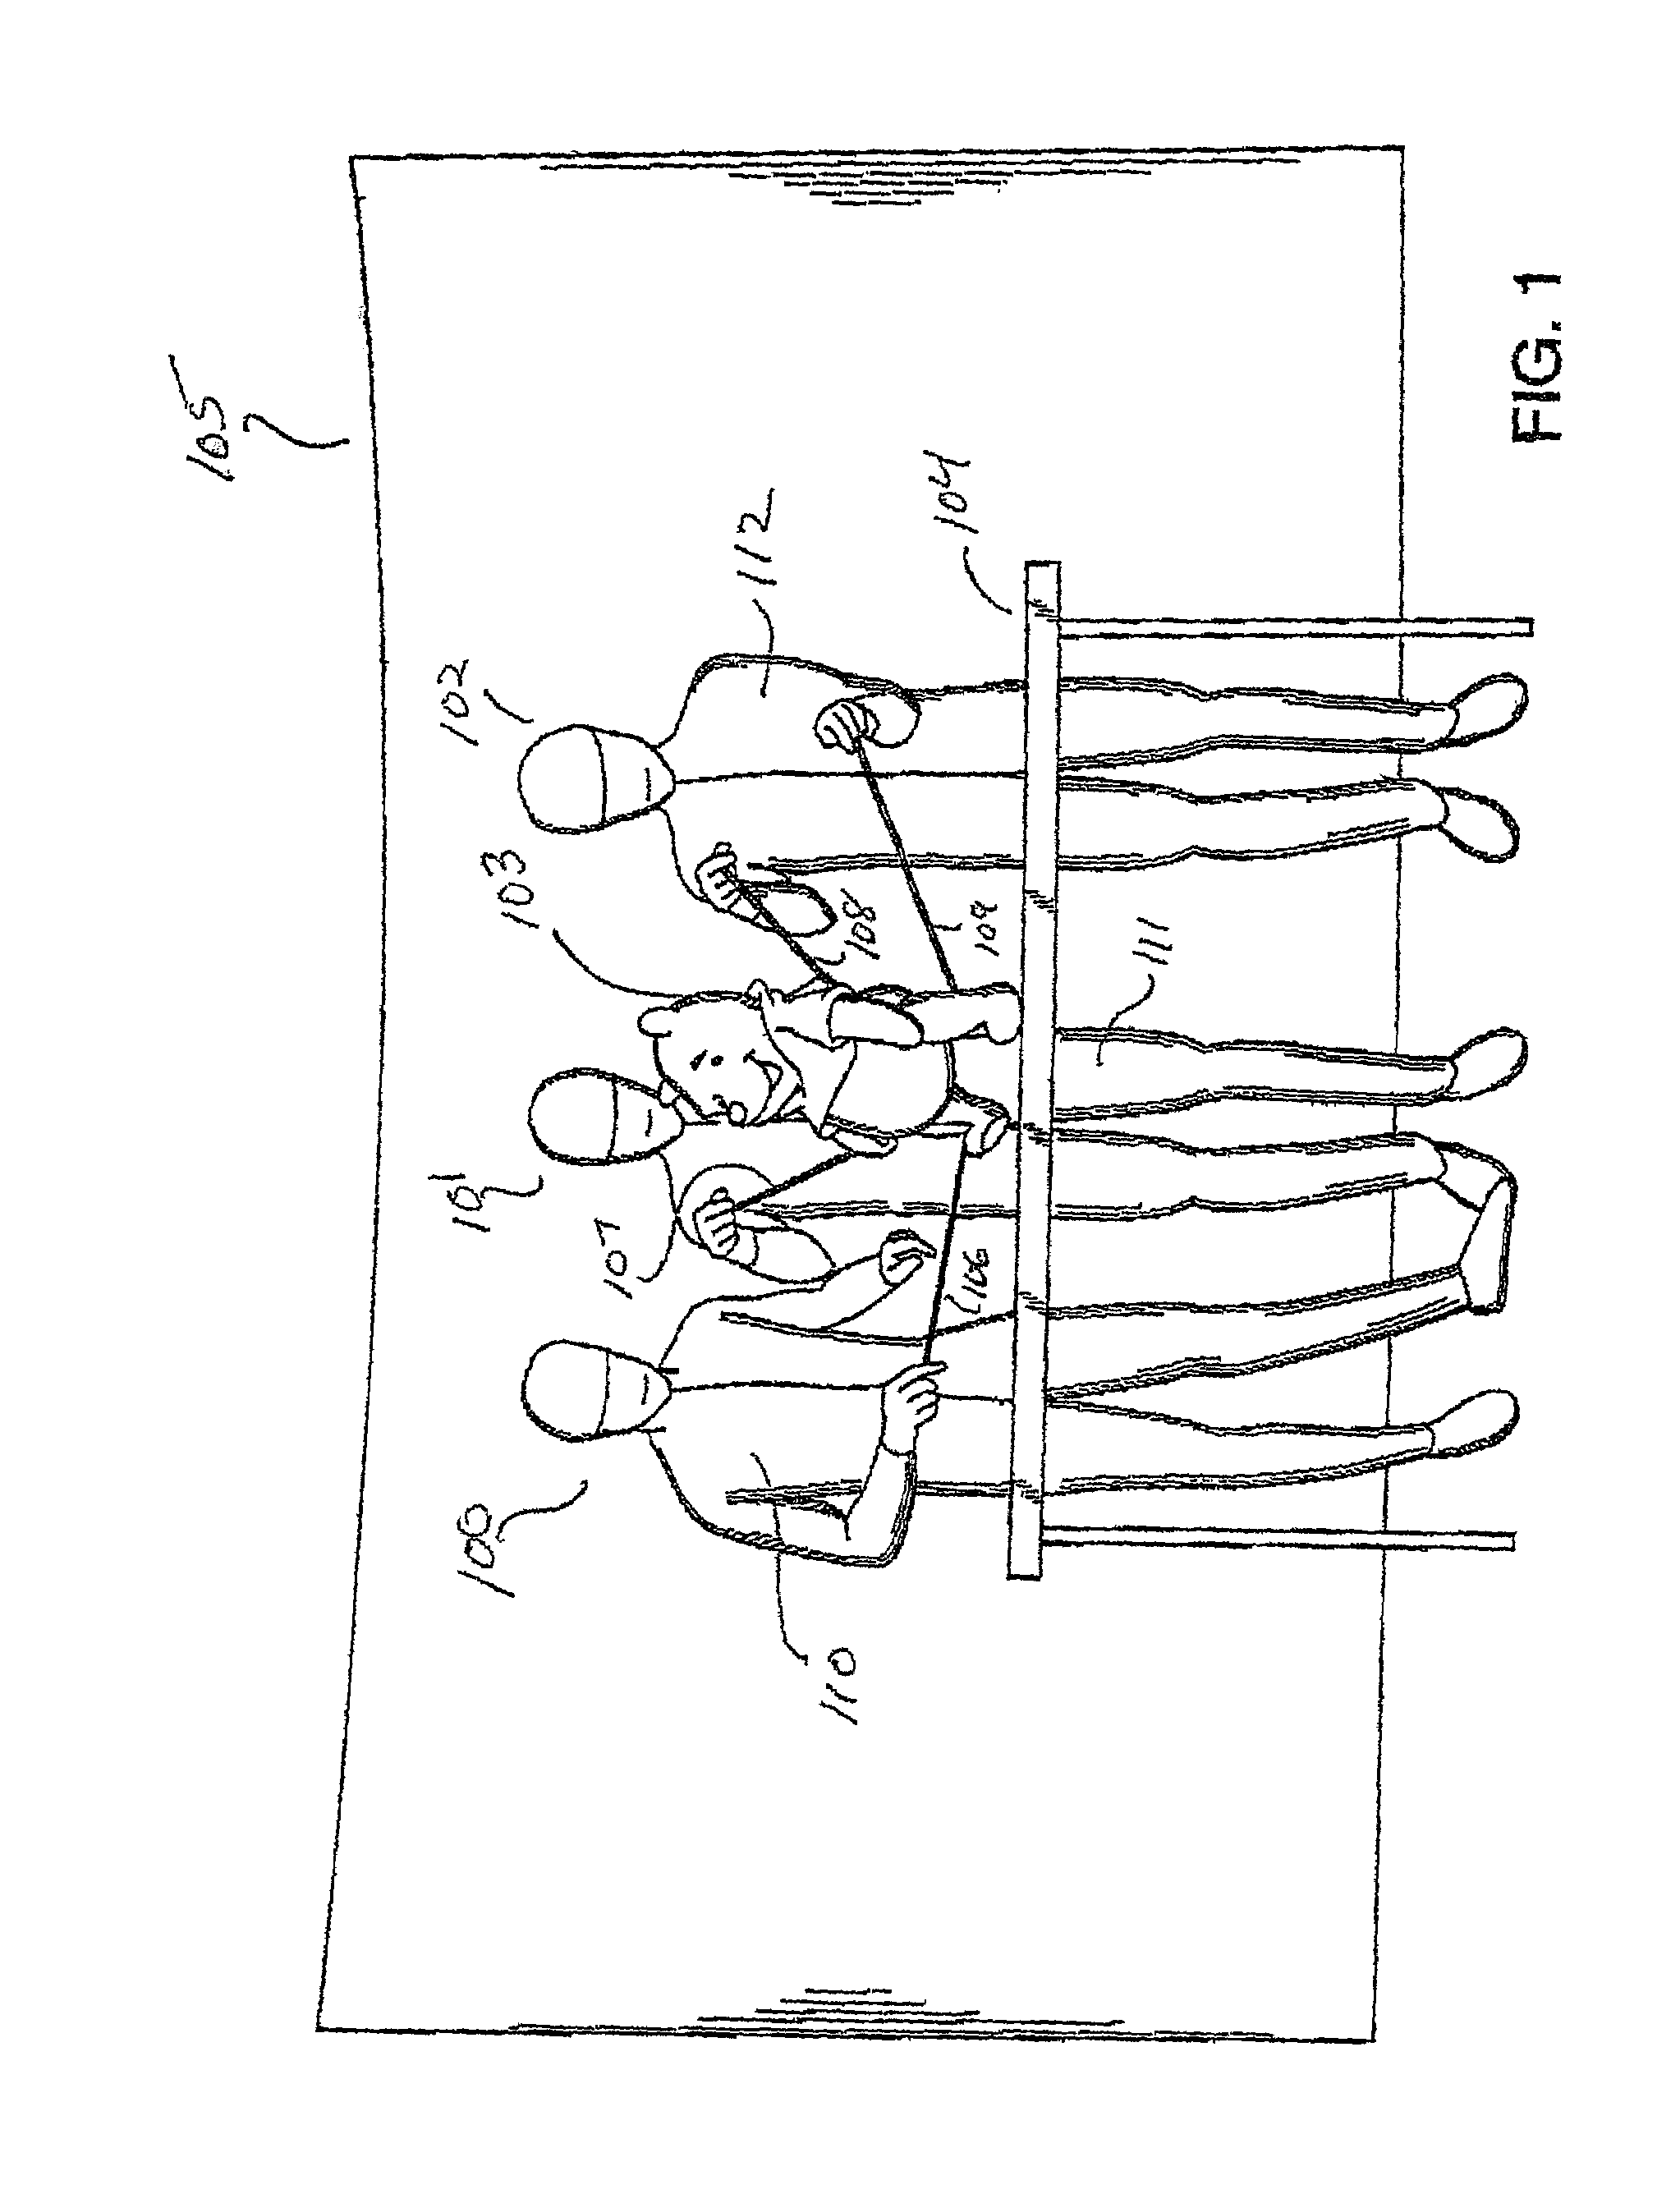 System and method for compositing of two or more real images in a cinematographic puppetry production